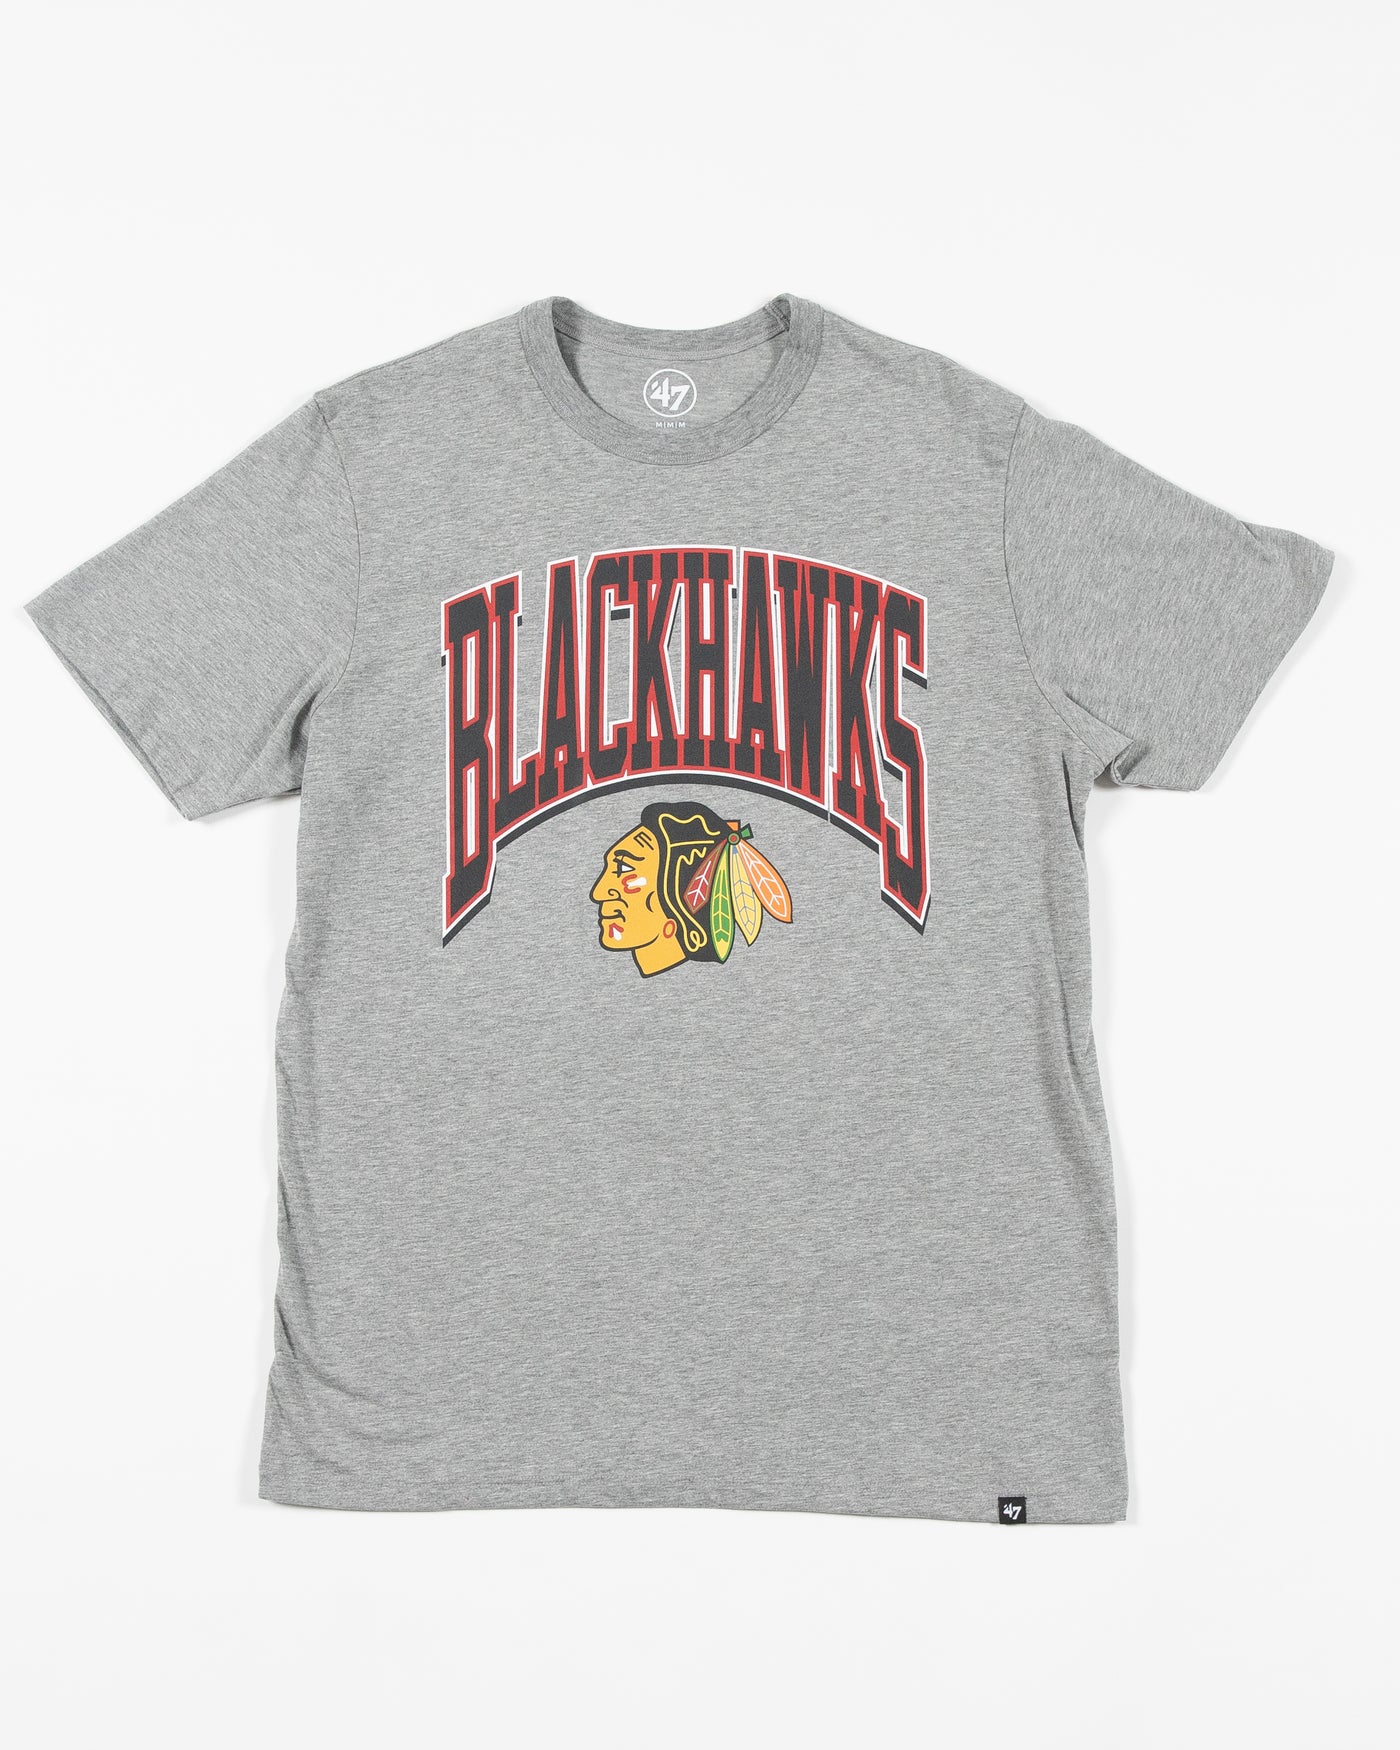 '47 brand grey short sleeve tee with Chicago Blackhawks wordmark graphic and primary logo across chest - front lay flat